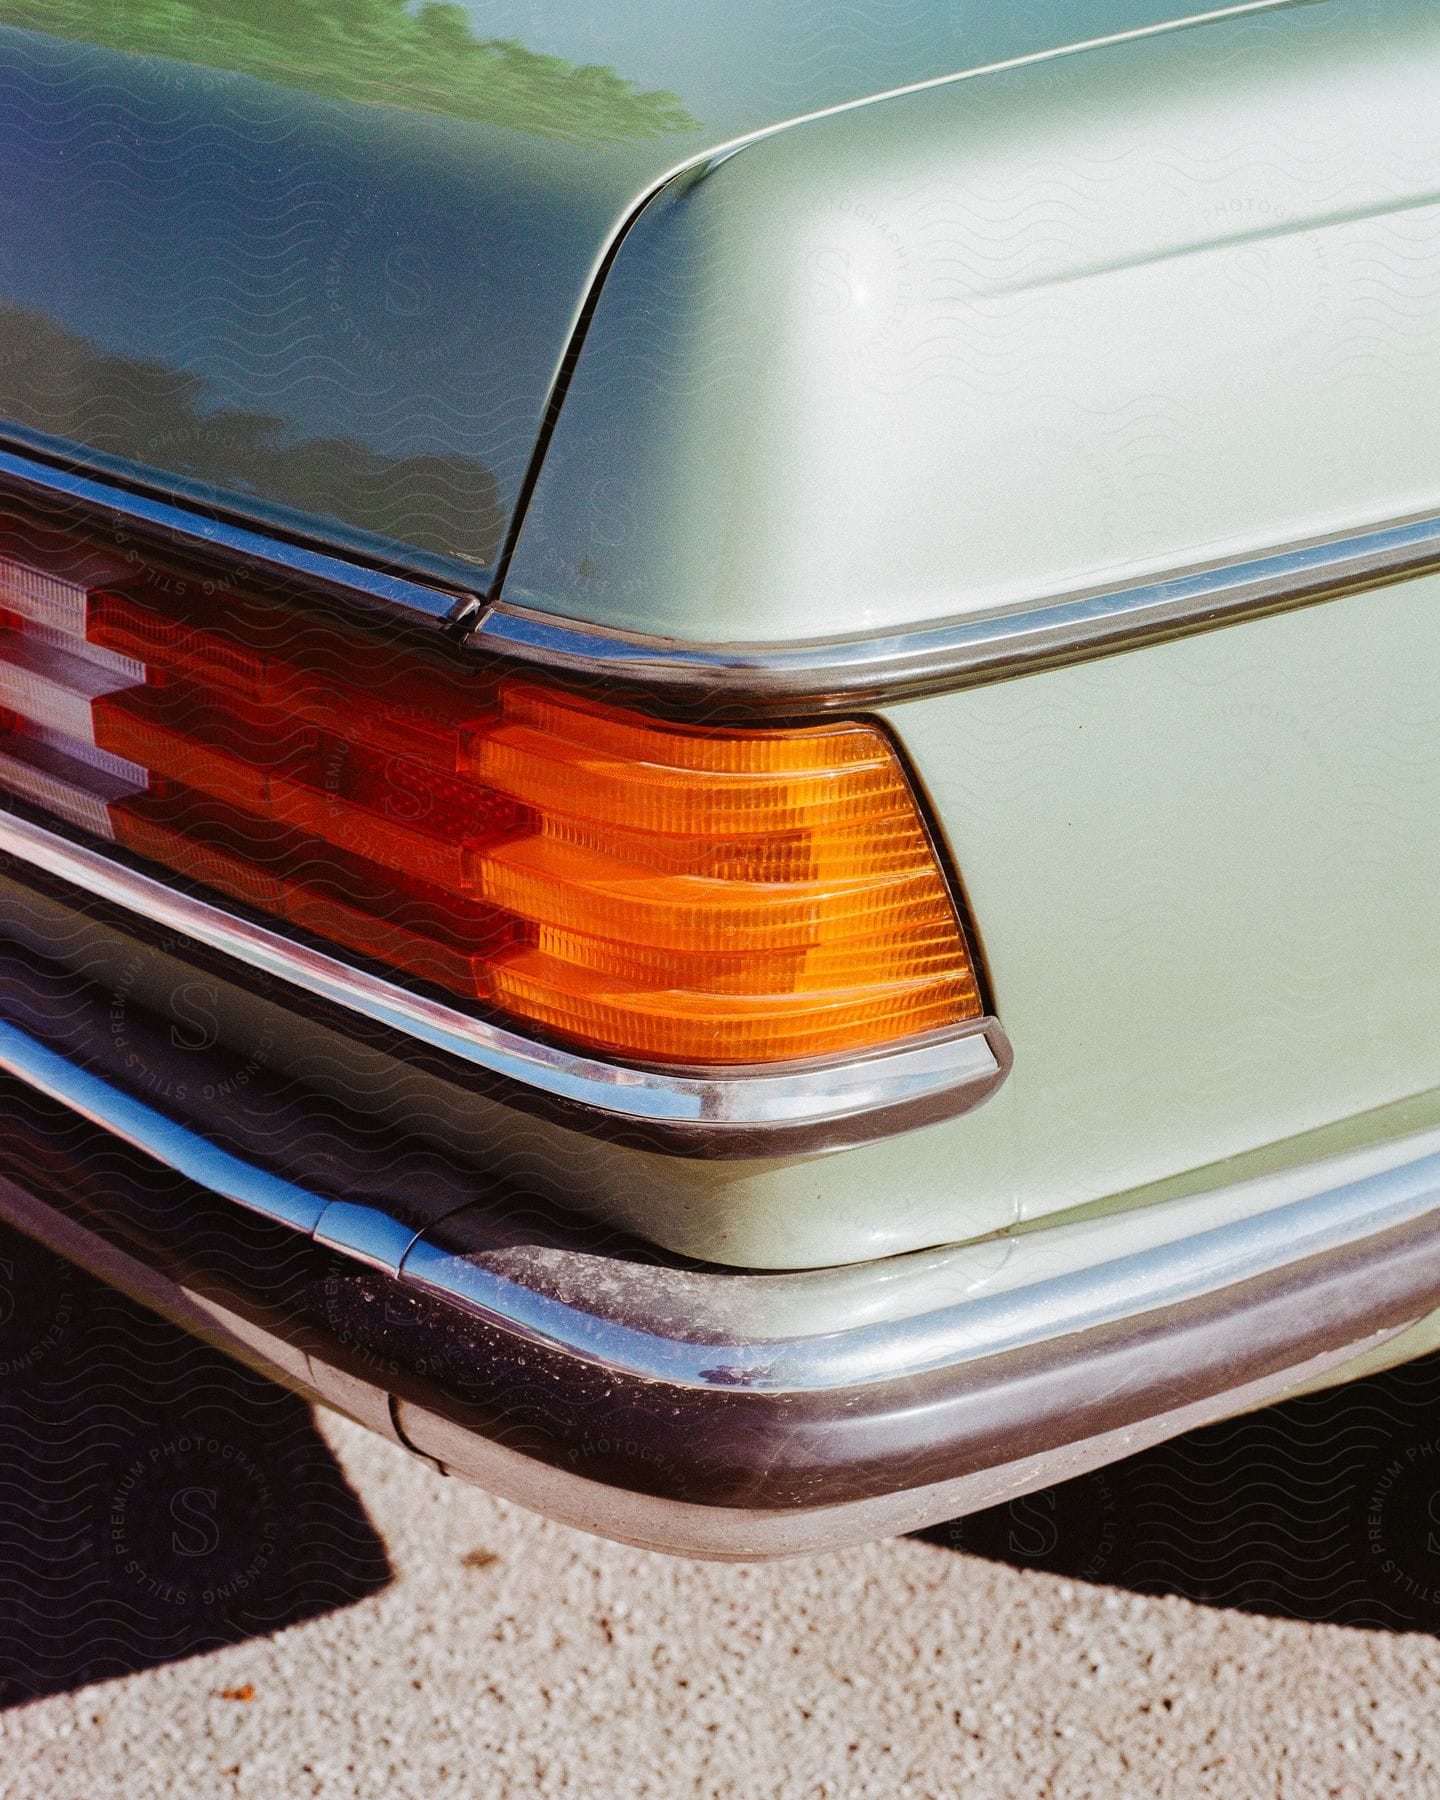 Stock photo of the taillight of an old car outdoors.